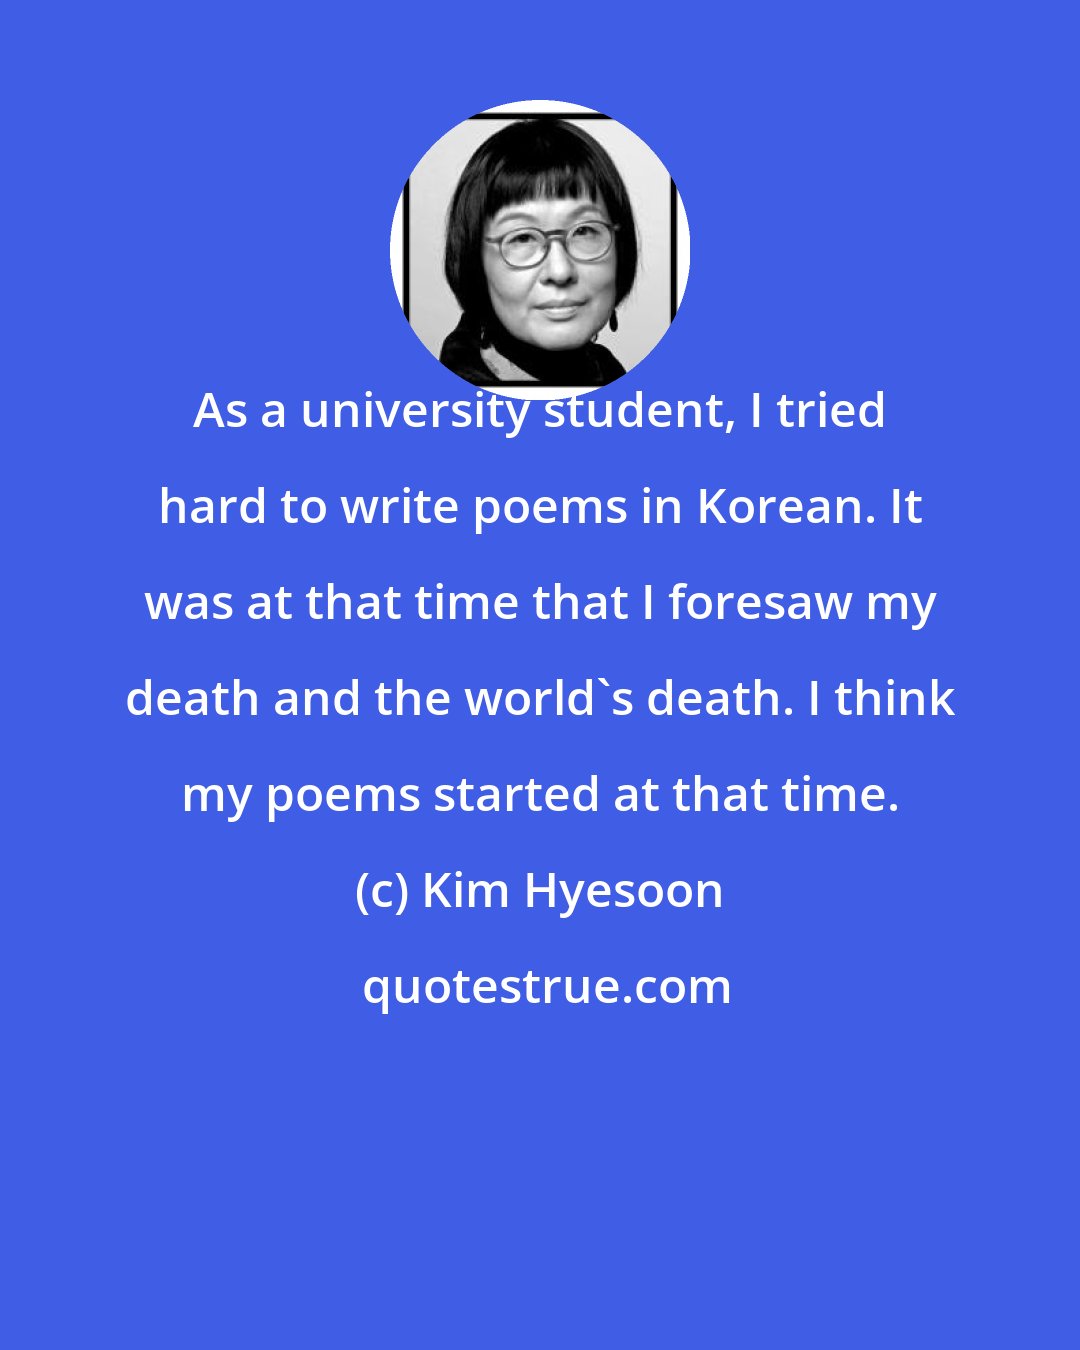 Kim Hyesoon: As a university student, I tried hard to write poems in Korean. It was at that time that I foresaw my death and the world's death. I think my poems started at that time.